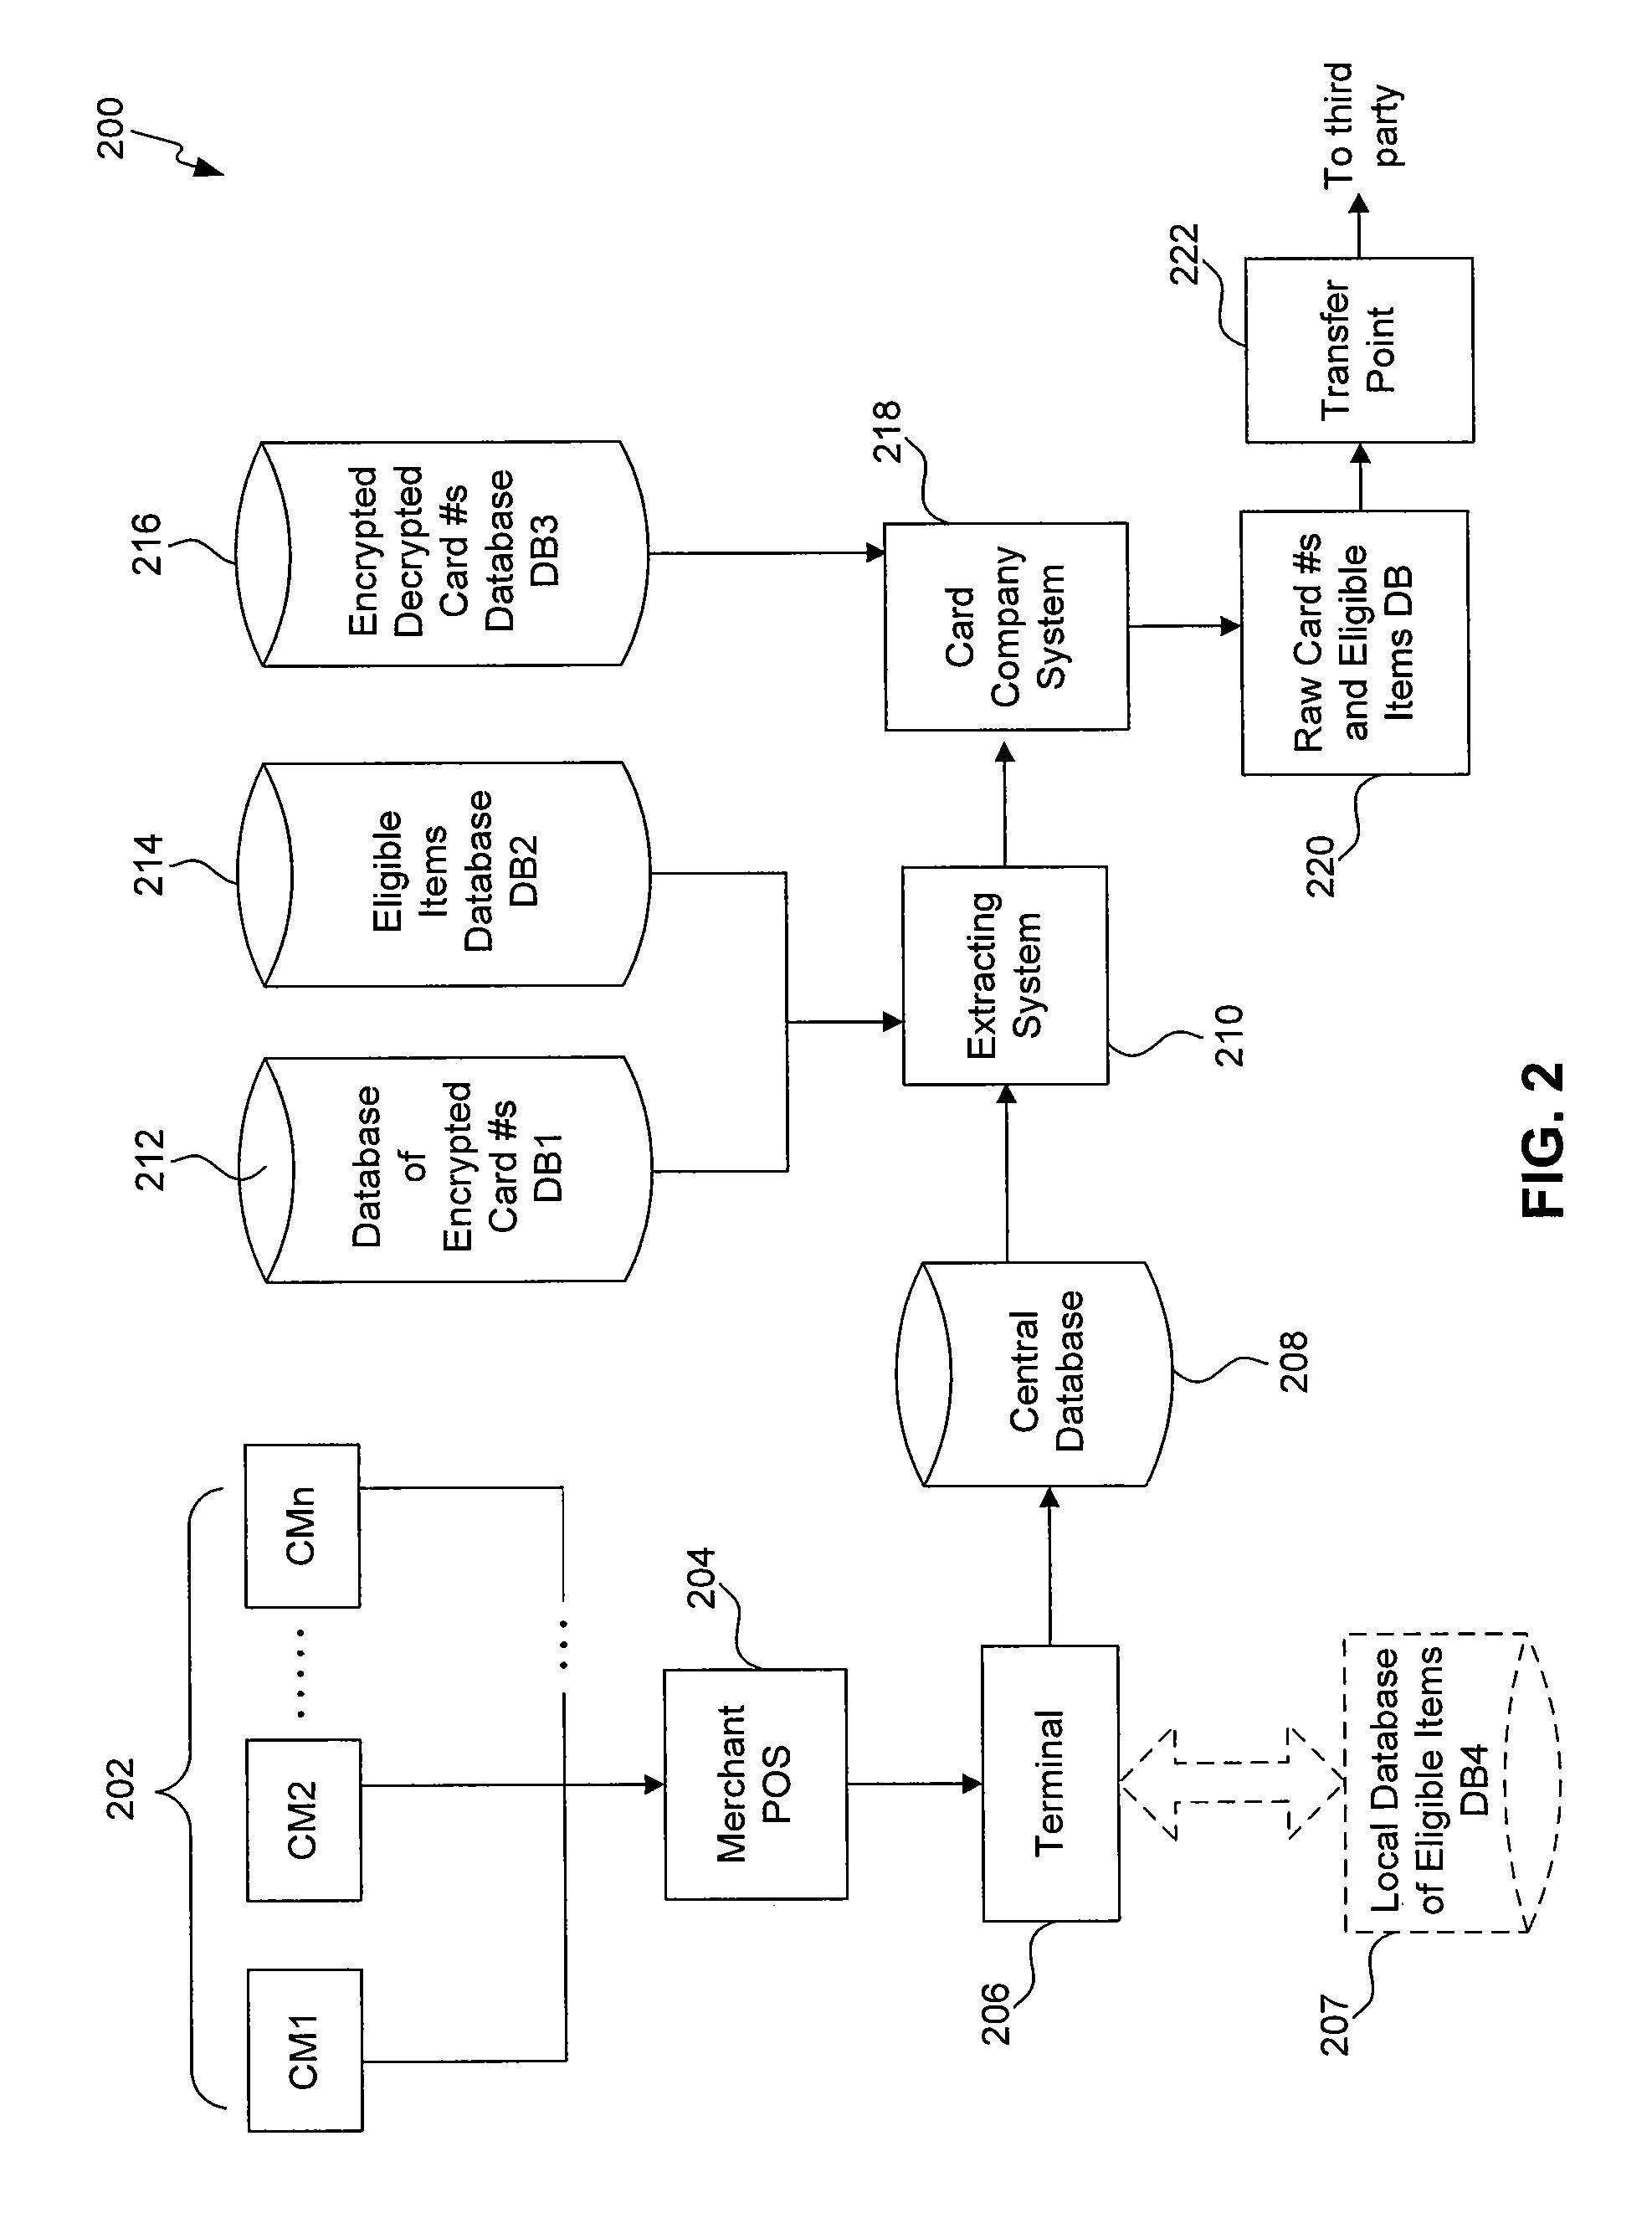 Transmission and capture of line-item-detail to assist in transaction substantiation and matching